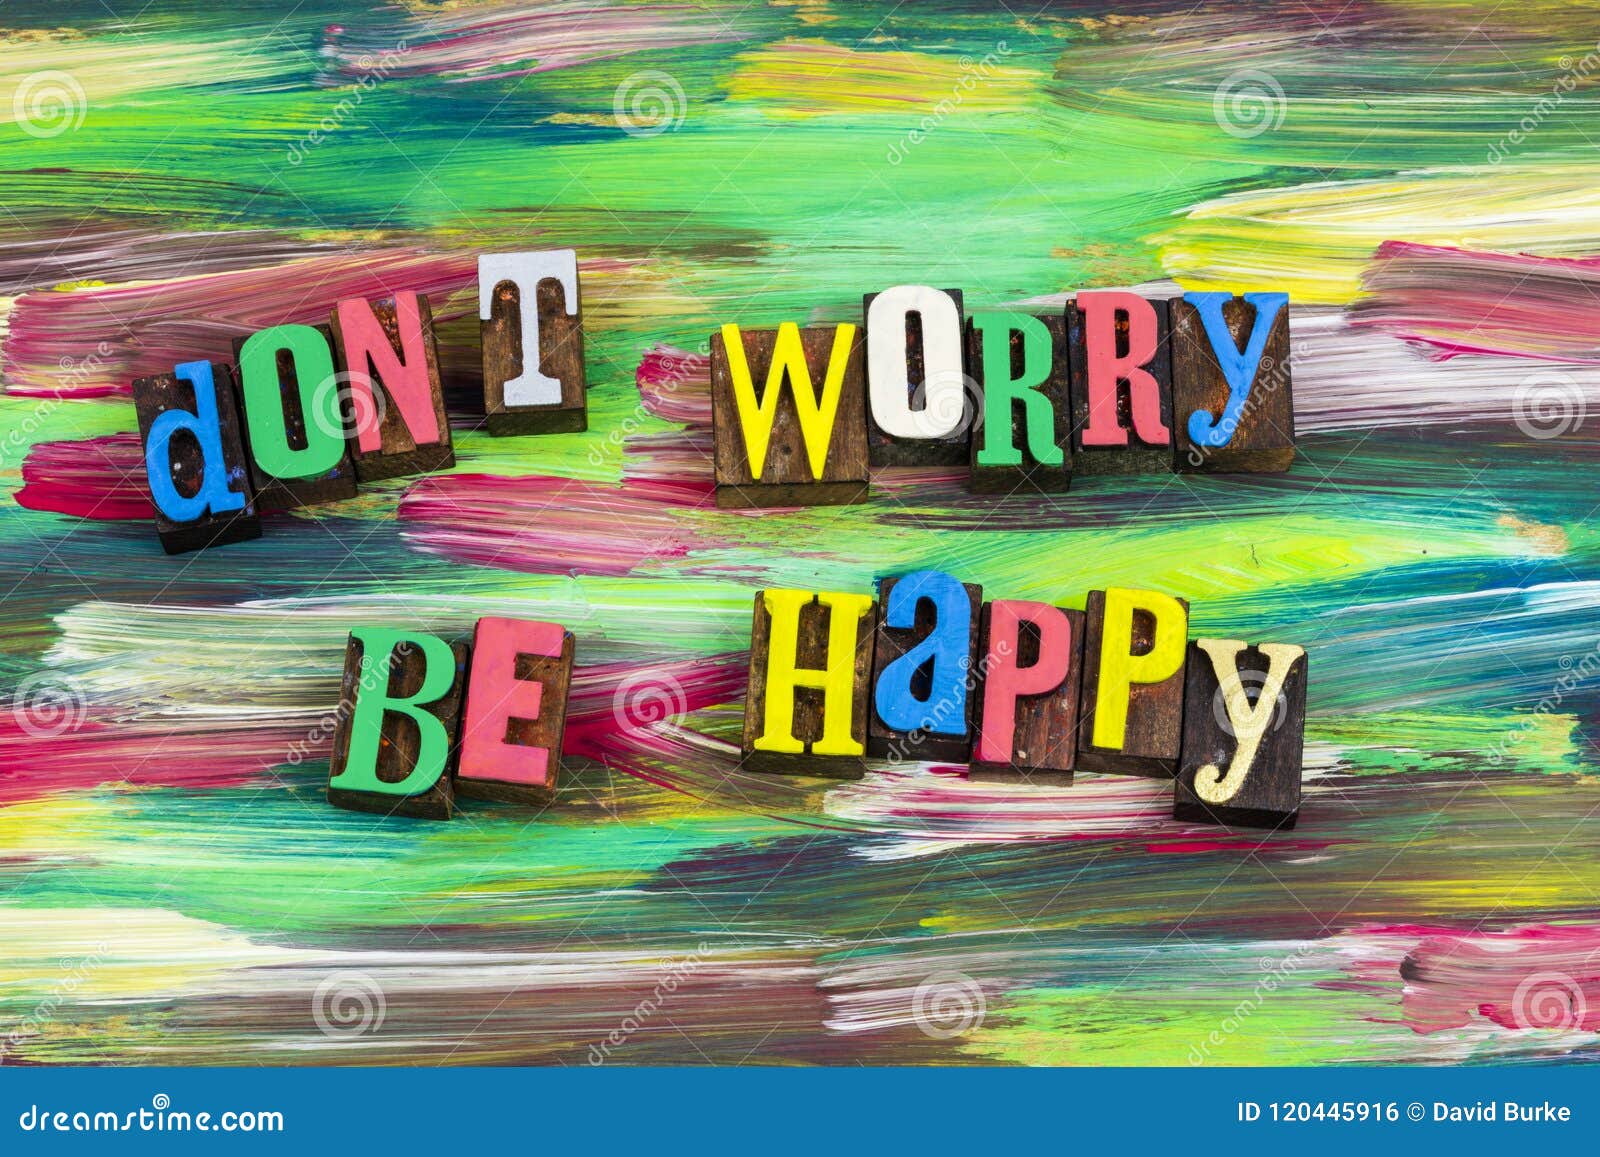 WORRY FREE LIFE: How to Think Positive and Have a Worry Free